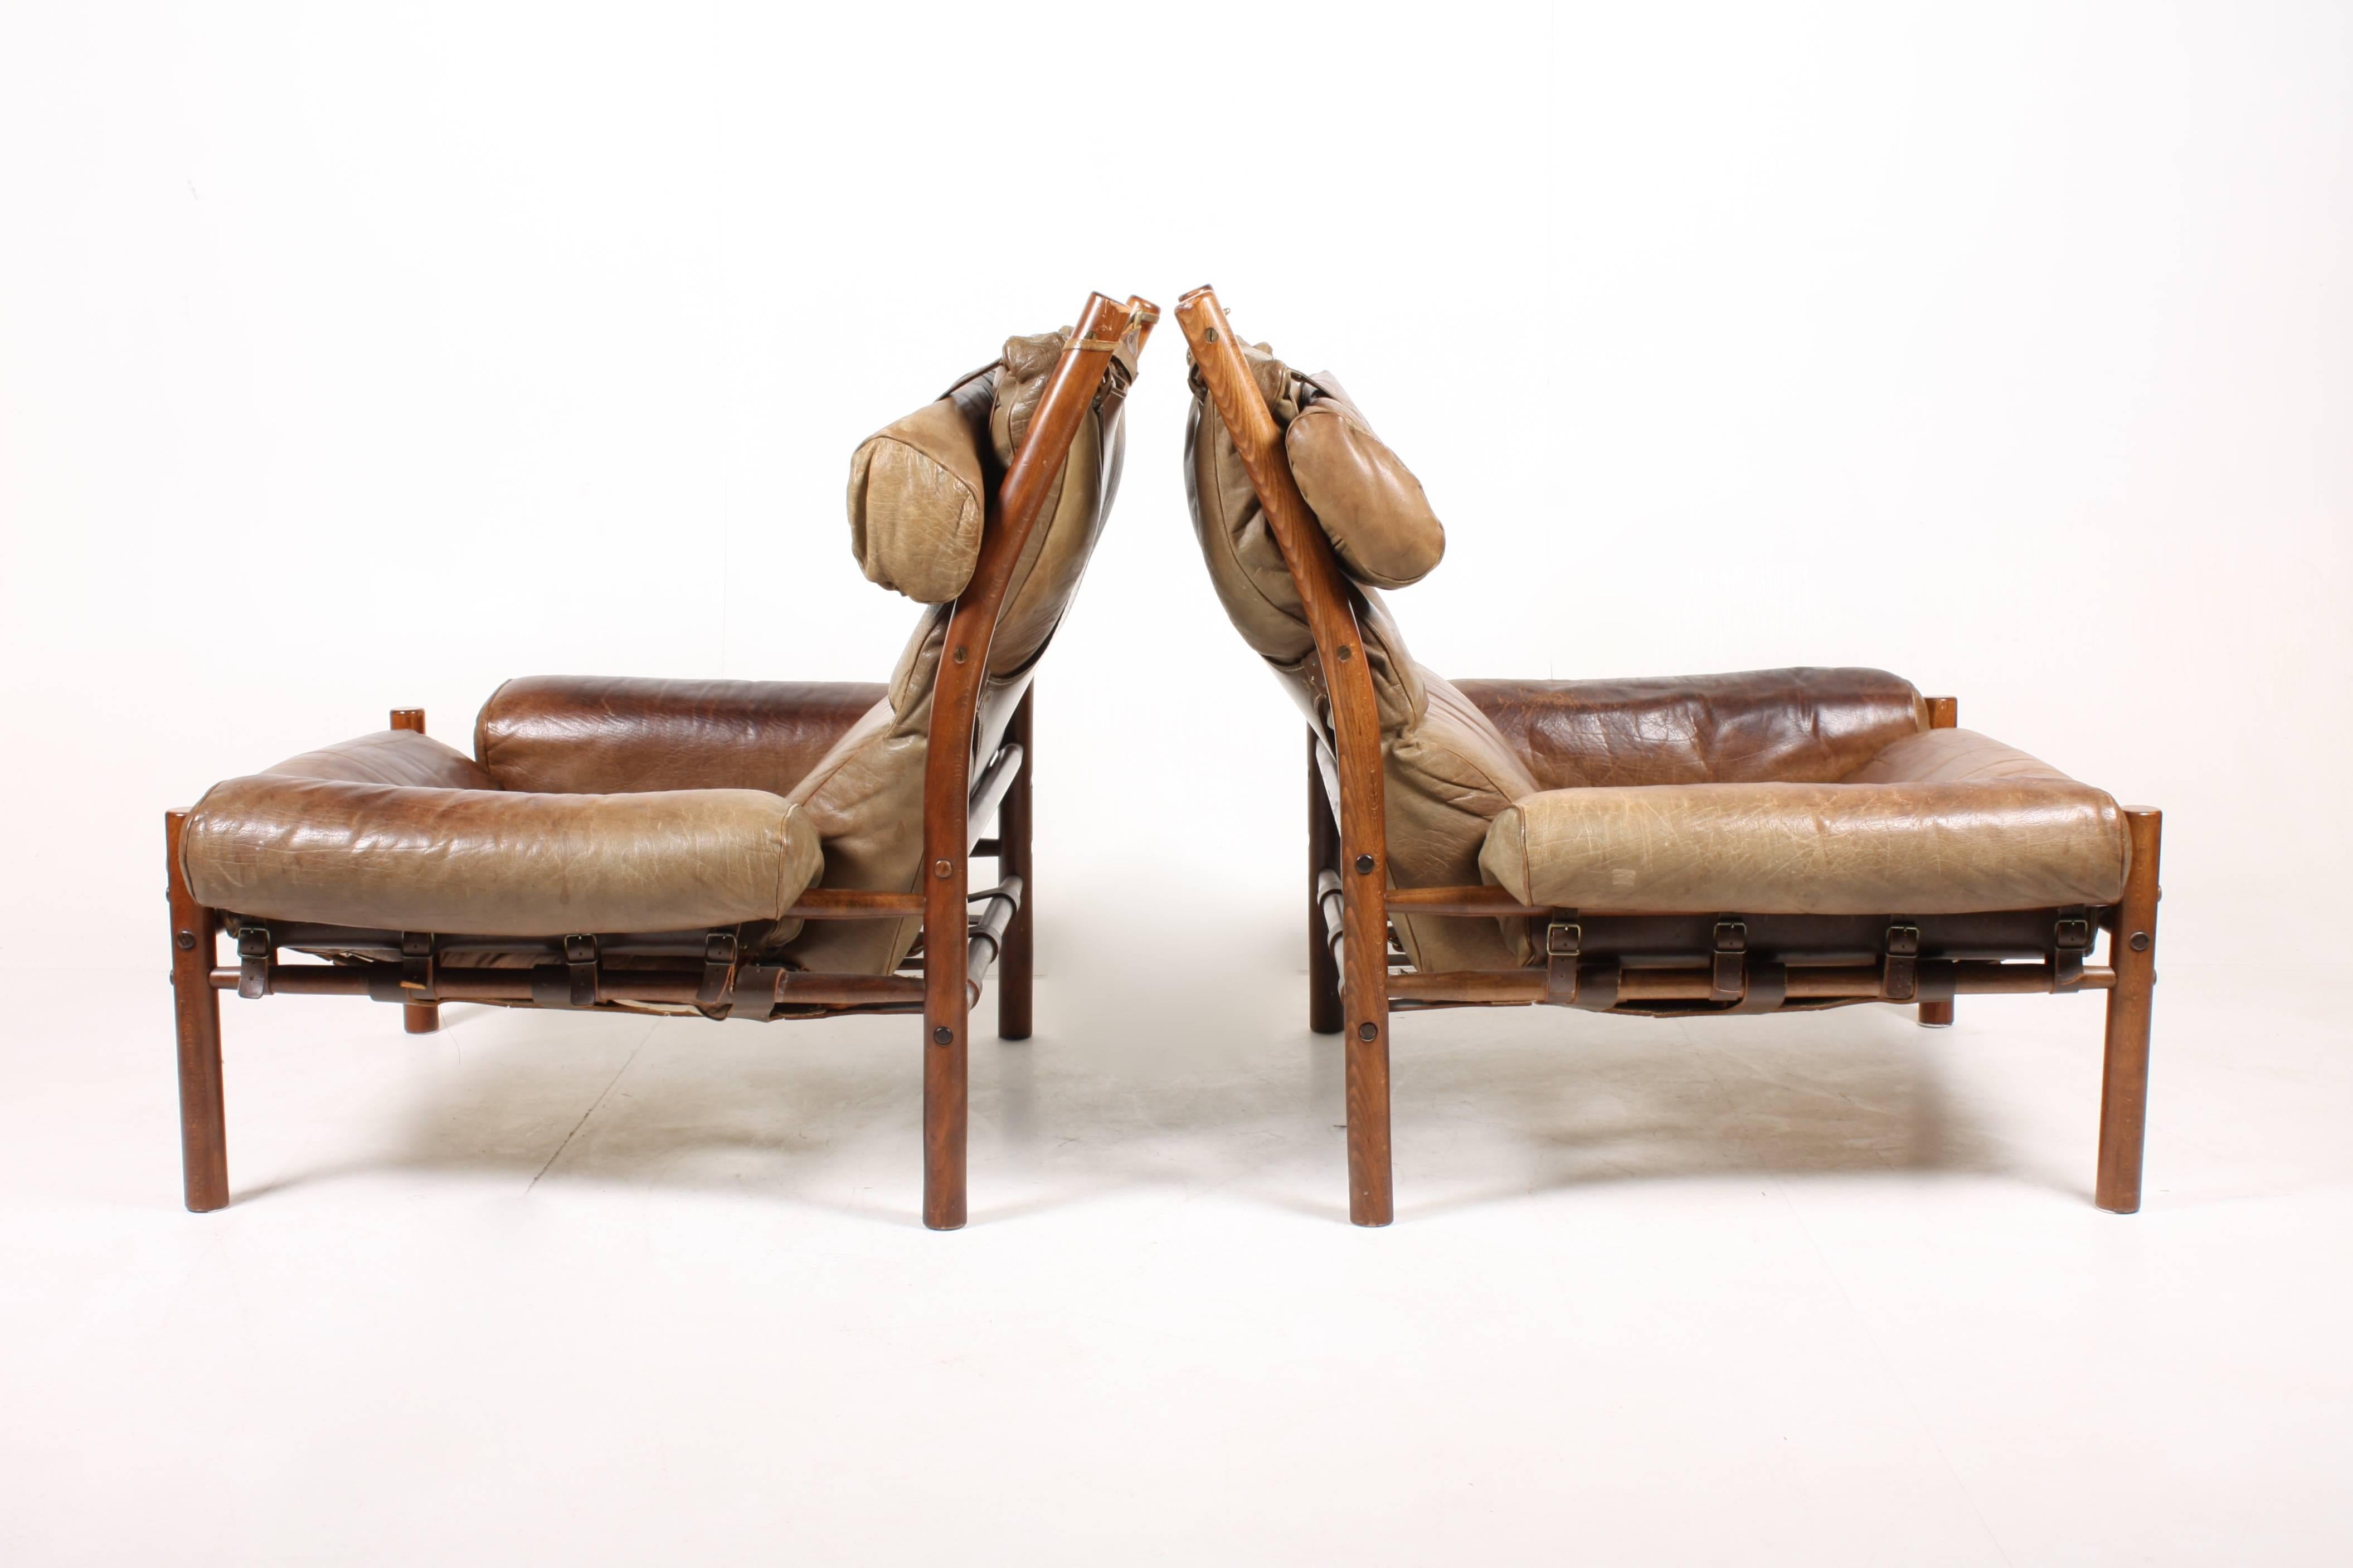 Scandinavian Modern Pair of Inca Lounge Chairs by Norell